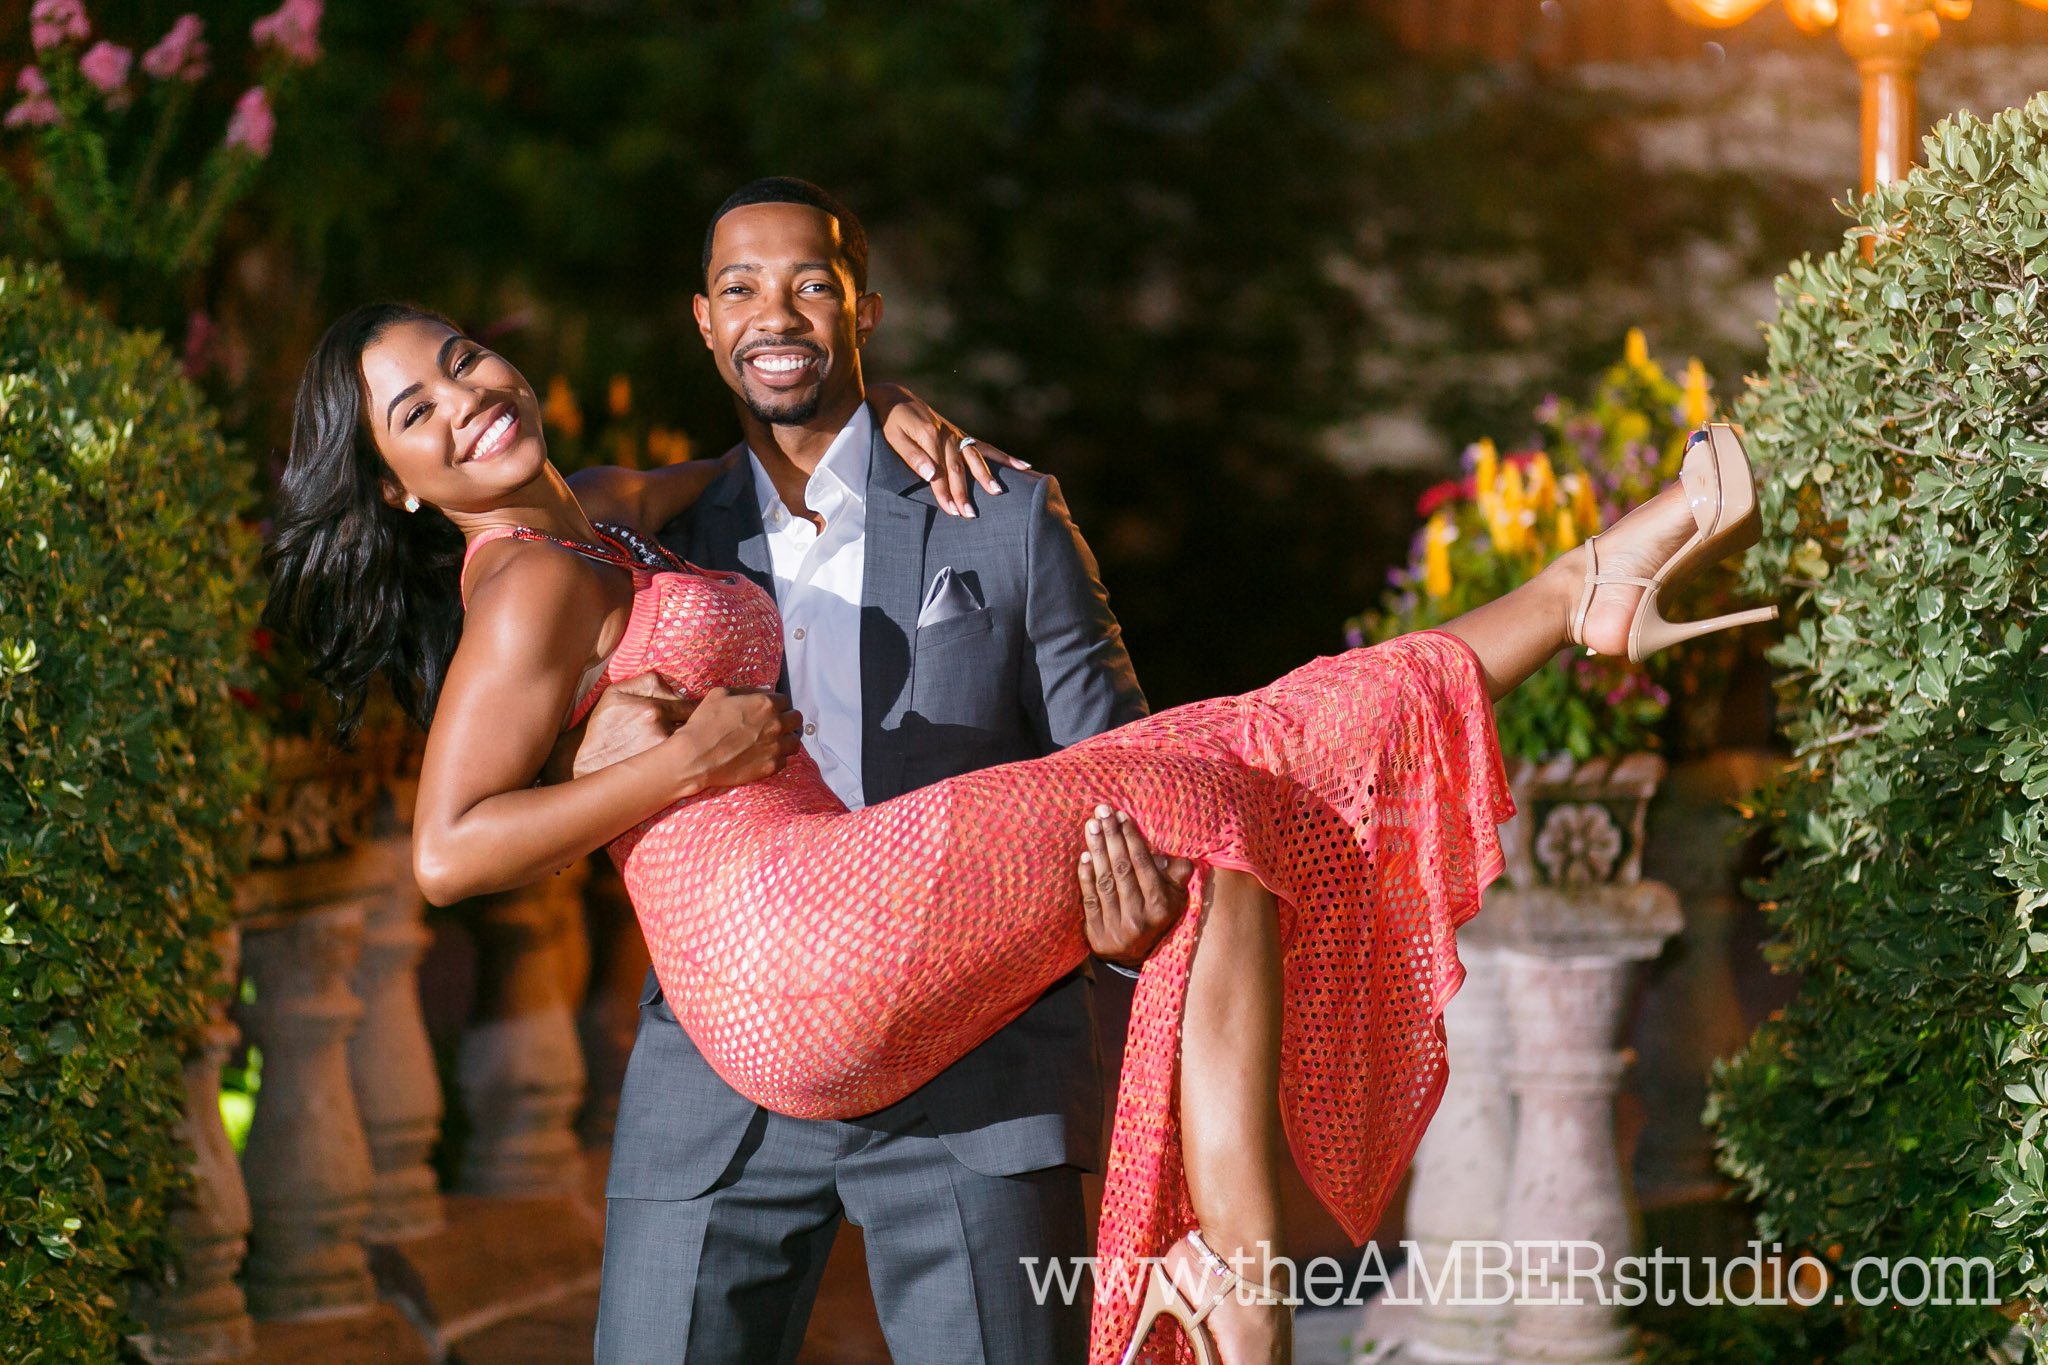 black-wedding-photographer-dallas-texas-engagement-photos-amber-knowles-studio-fort-worth-botanical-gardens-red-dress-suit-african-american-couple-cc0017